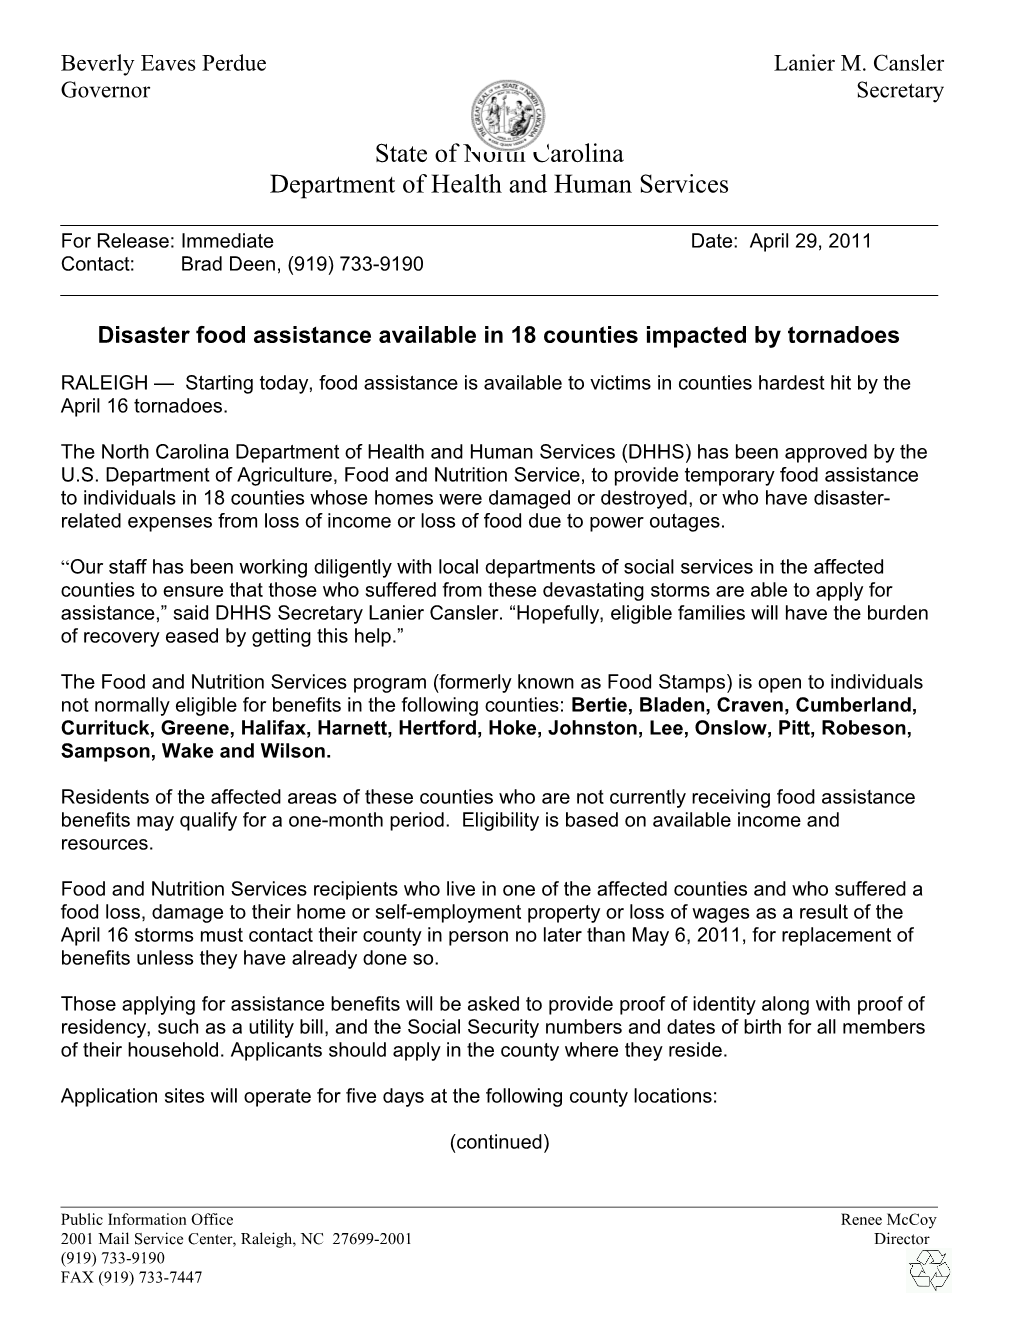 Disaster Food Assistance Available in 18 Counties Impacted by Tornadoes